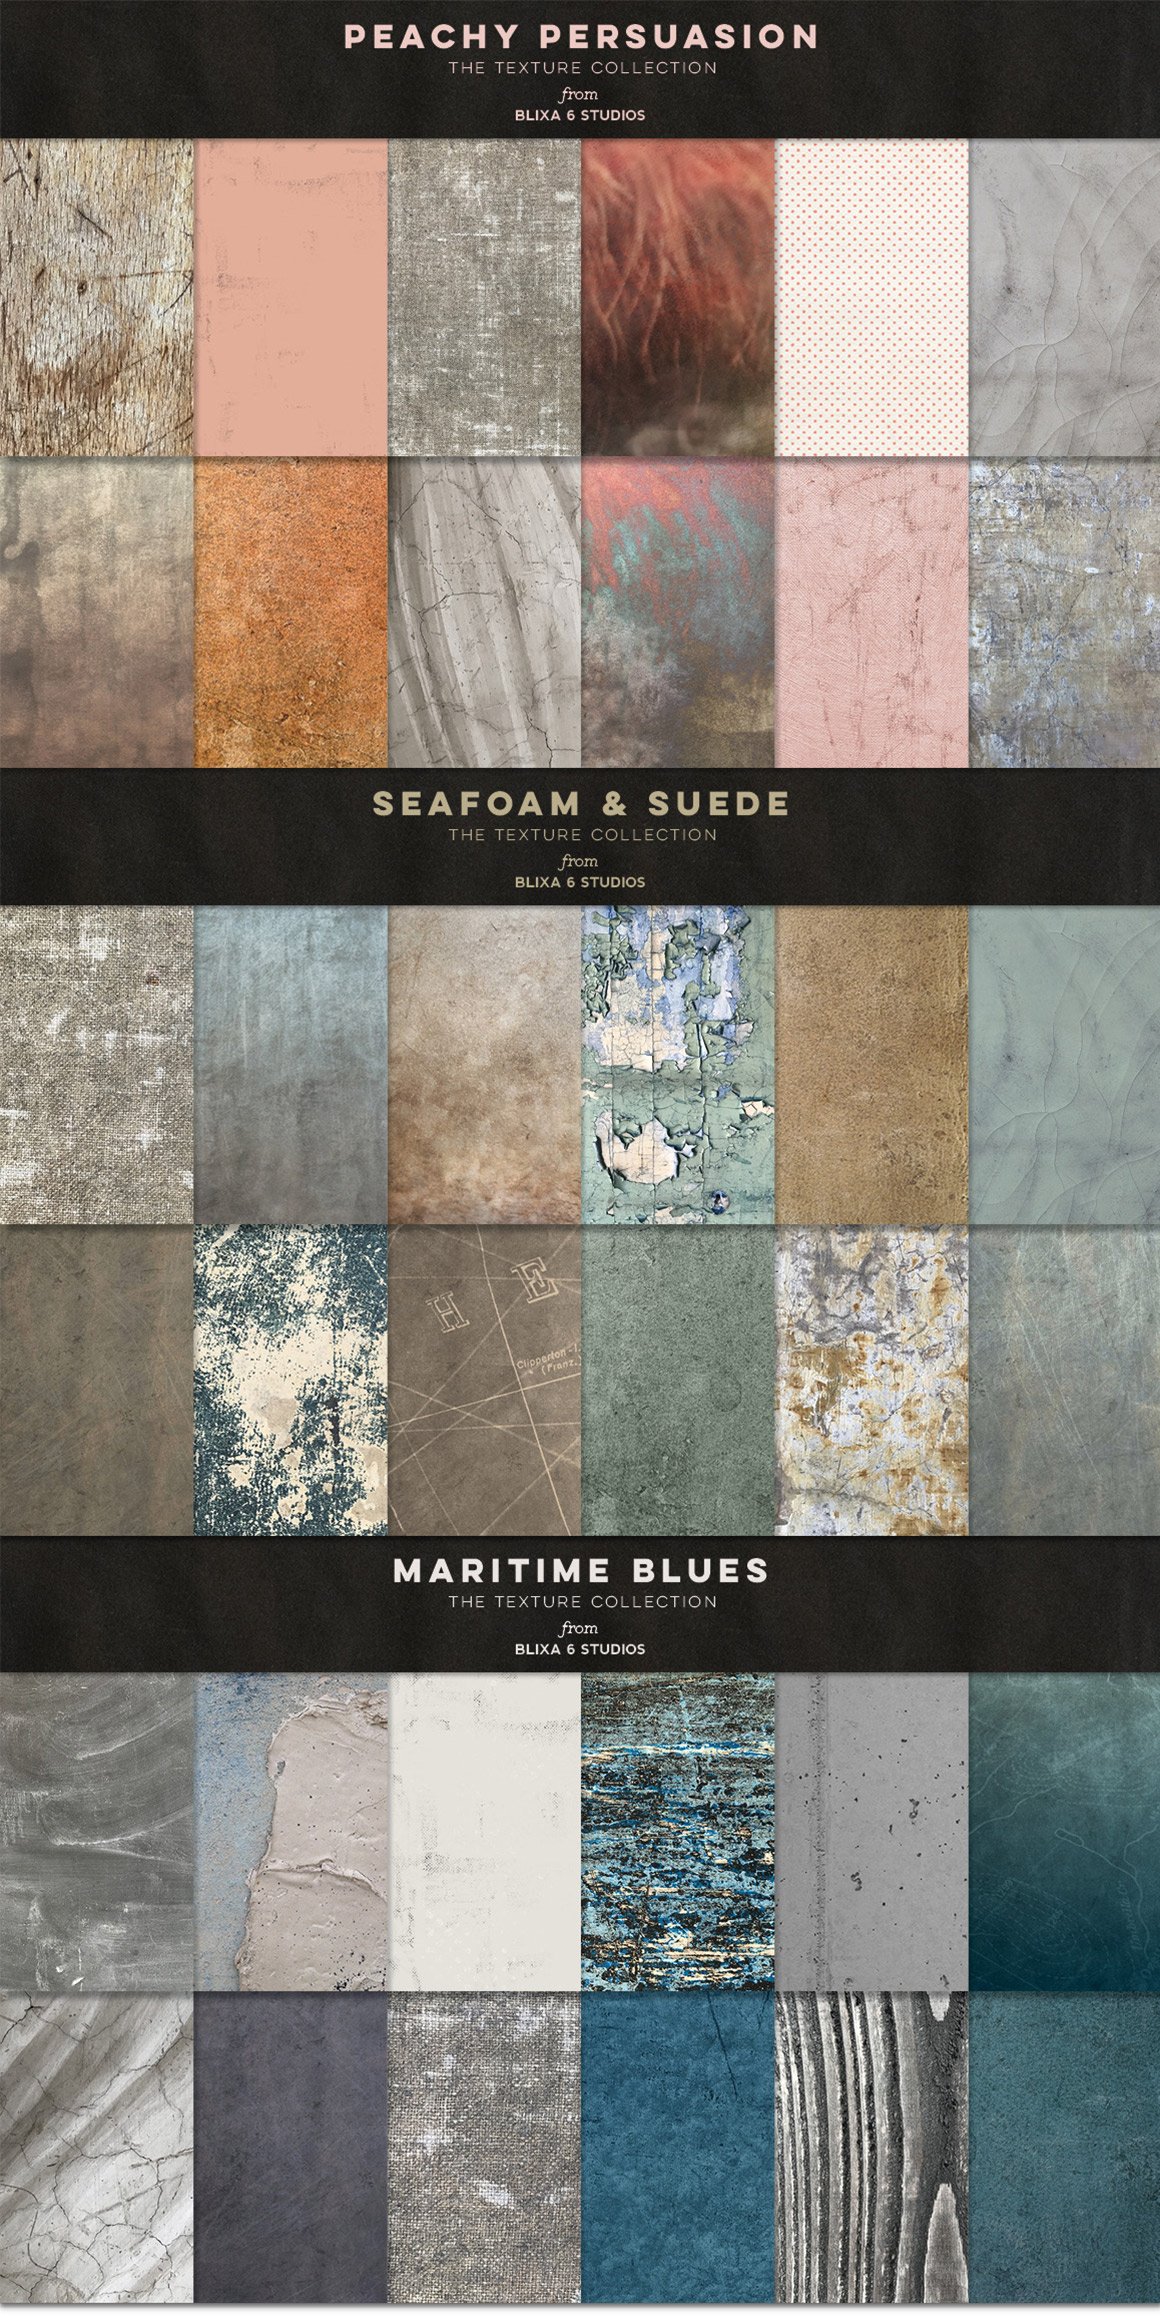 36 Gritty & Distressed Textures